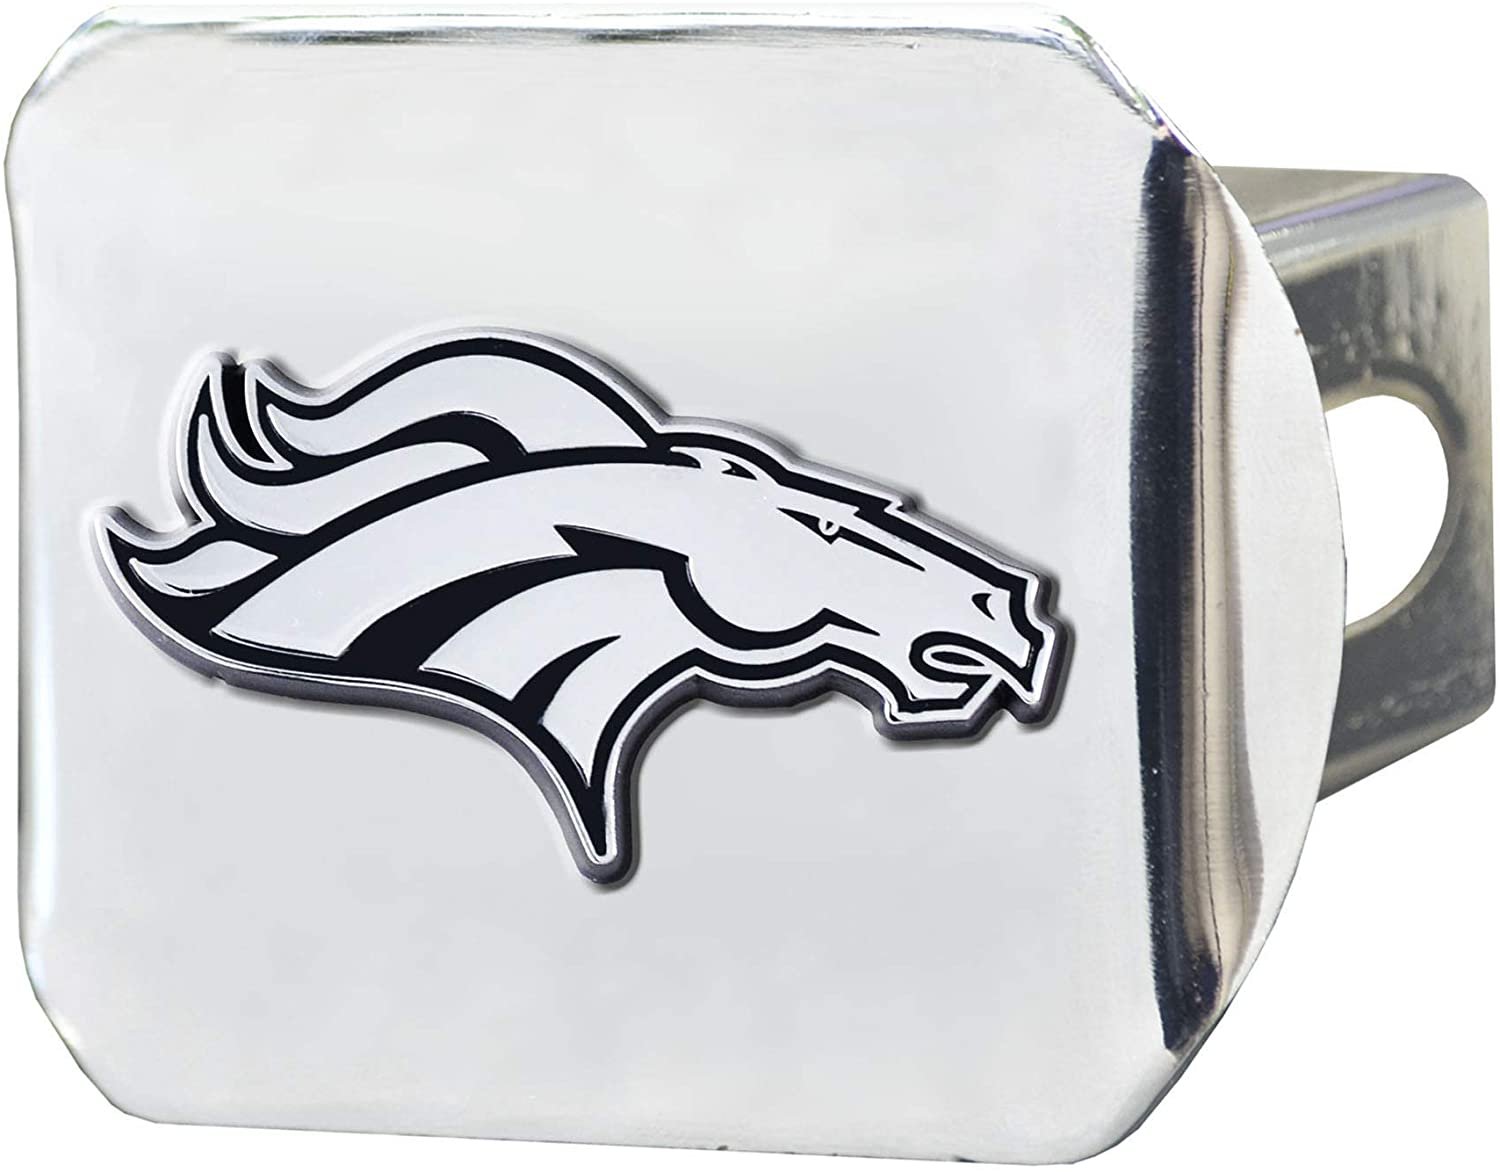 Denver Broncos Solid Metal Hitch Cover with Chrome Metal Emblem 2 Inch Square Type III